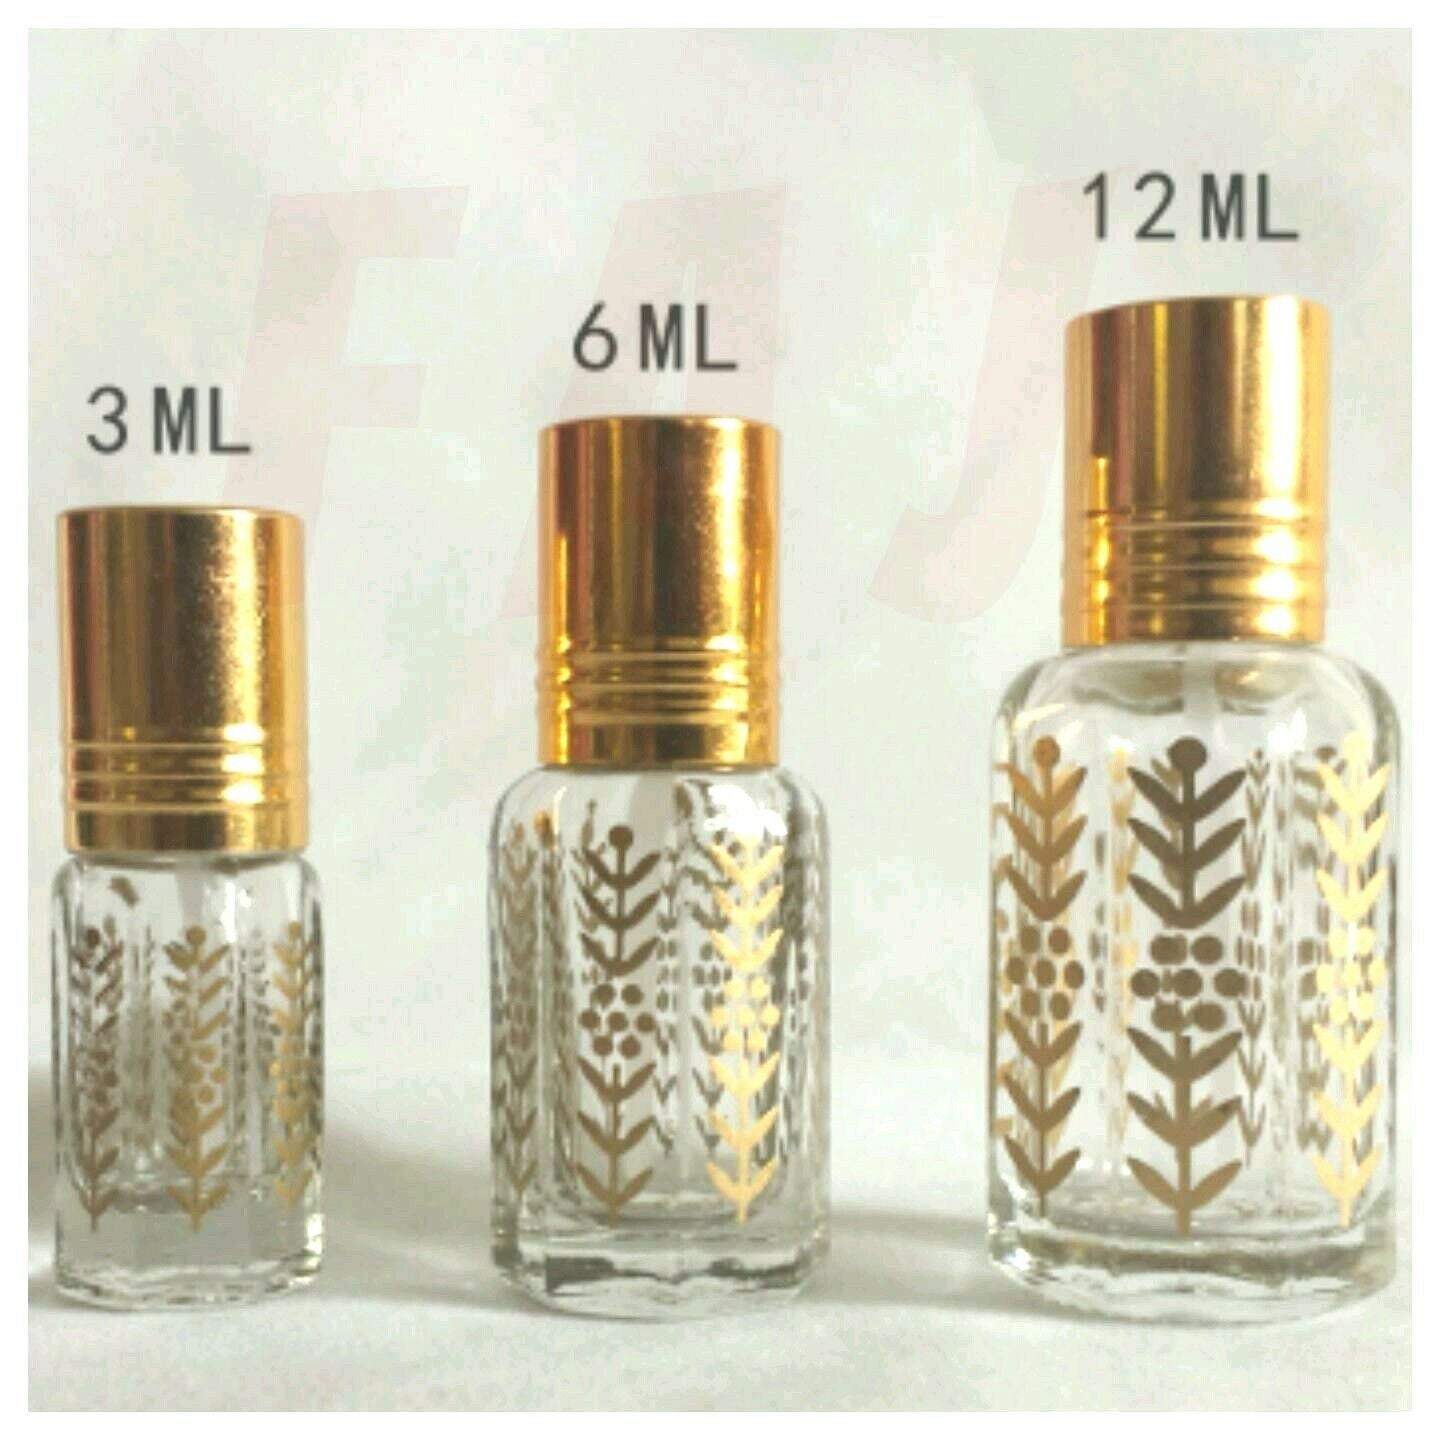 Amber Musk - Musk Amber - Attar - Concenrated Fragrance Oil - ITR - Alcohol  Free - Unisex - Import Oil